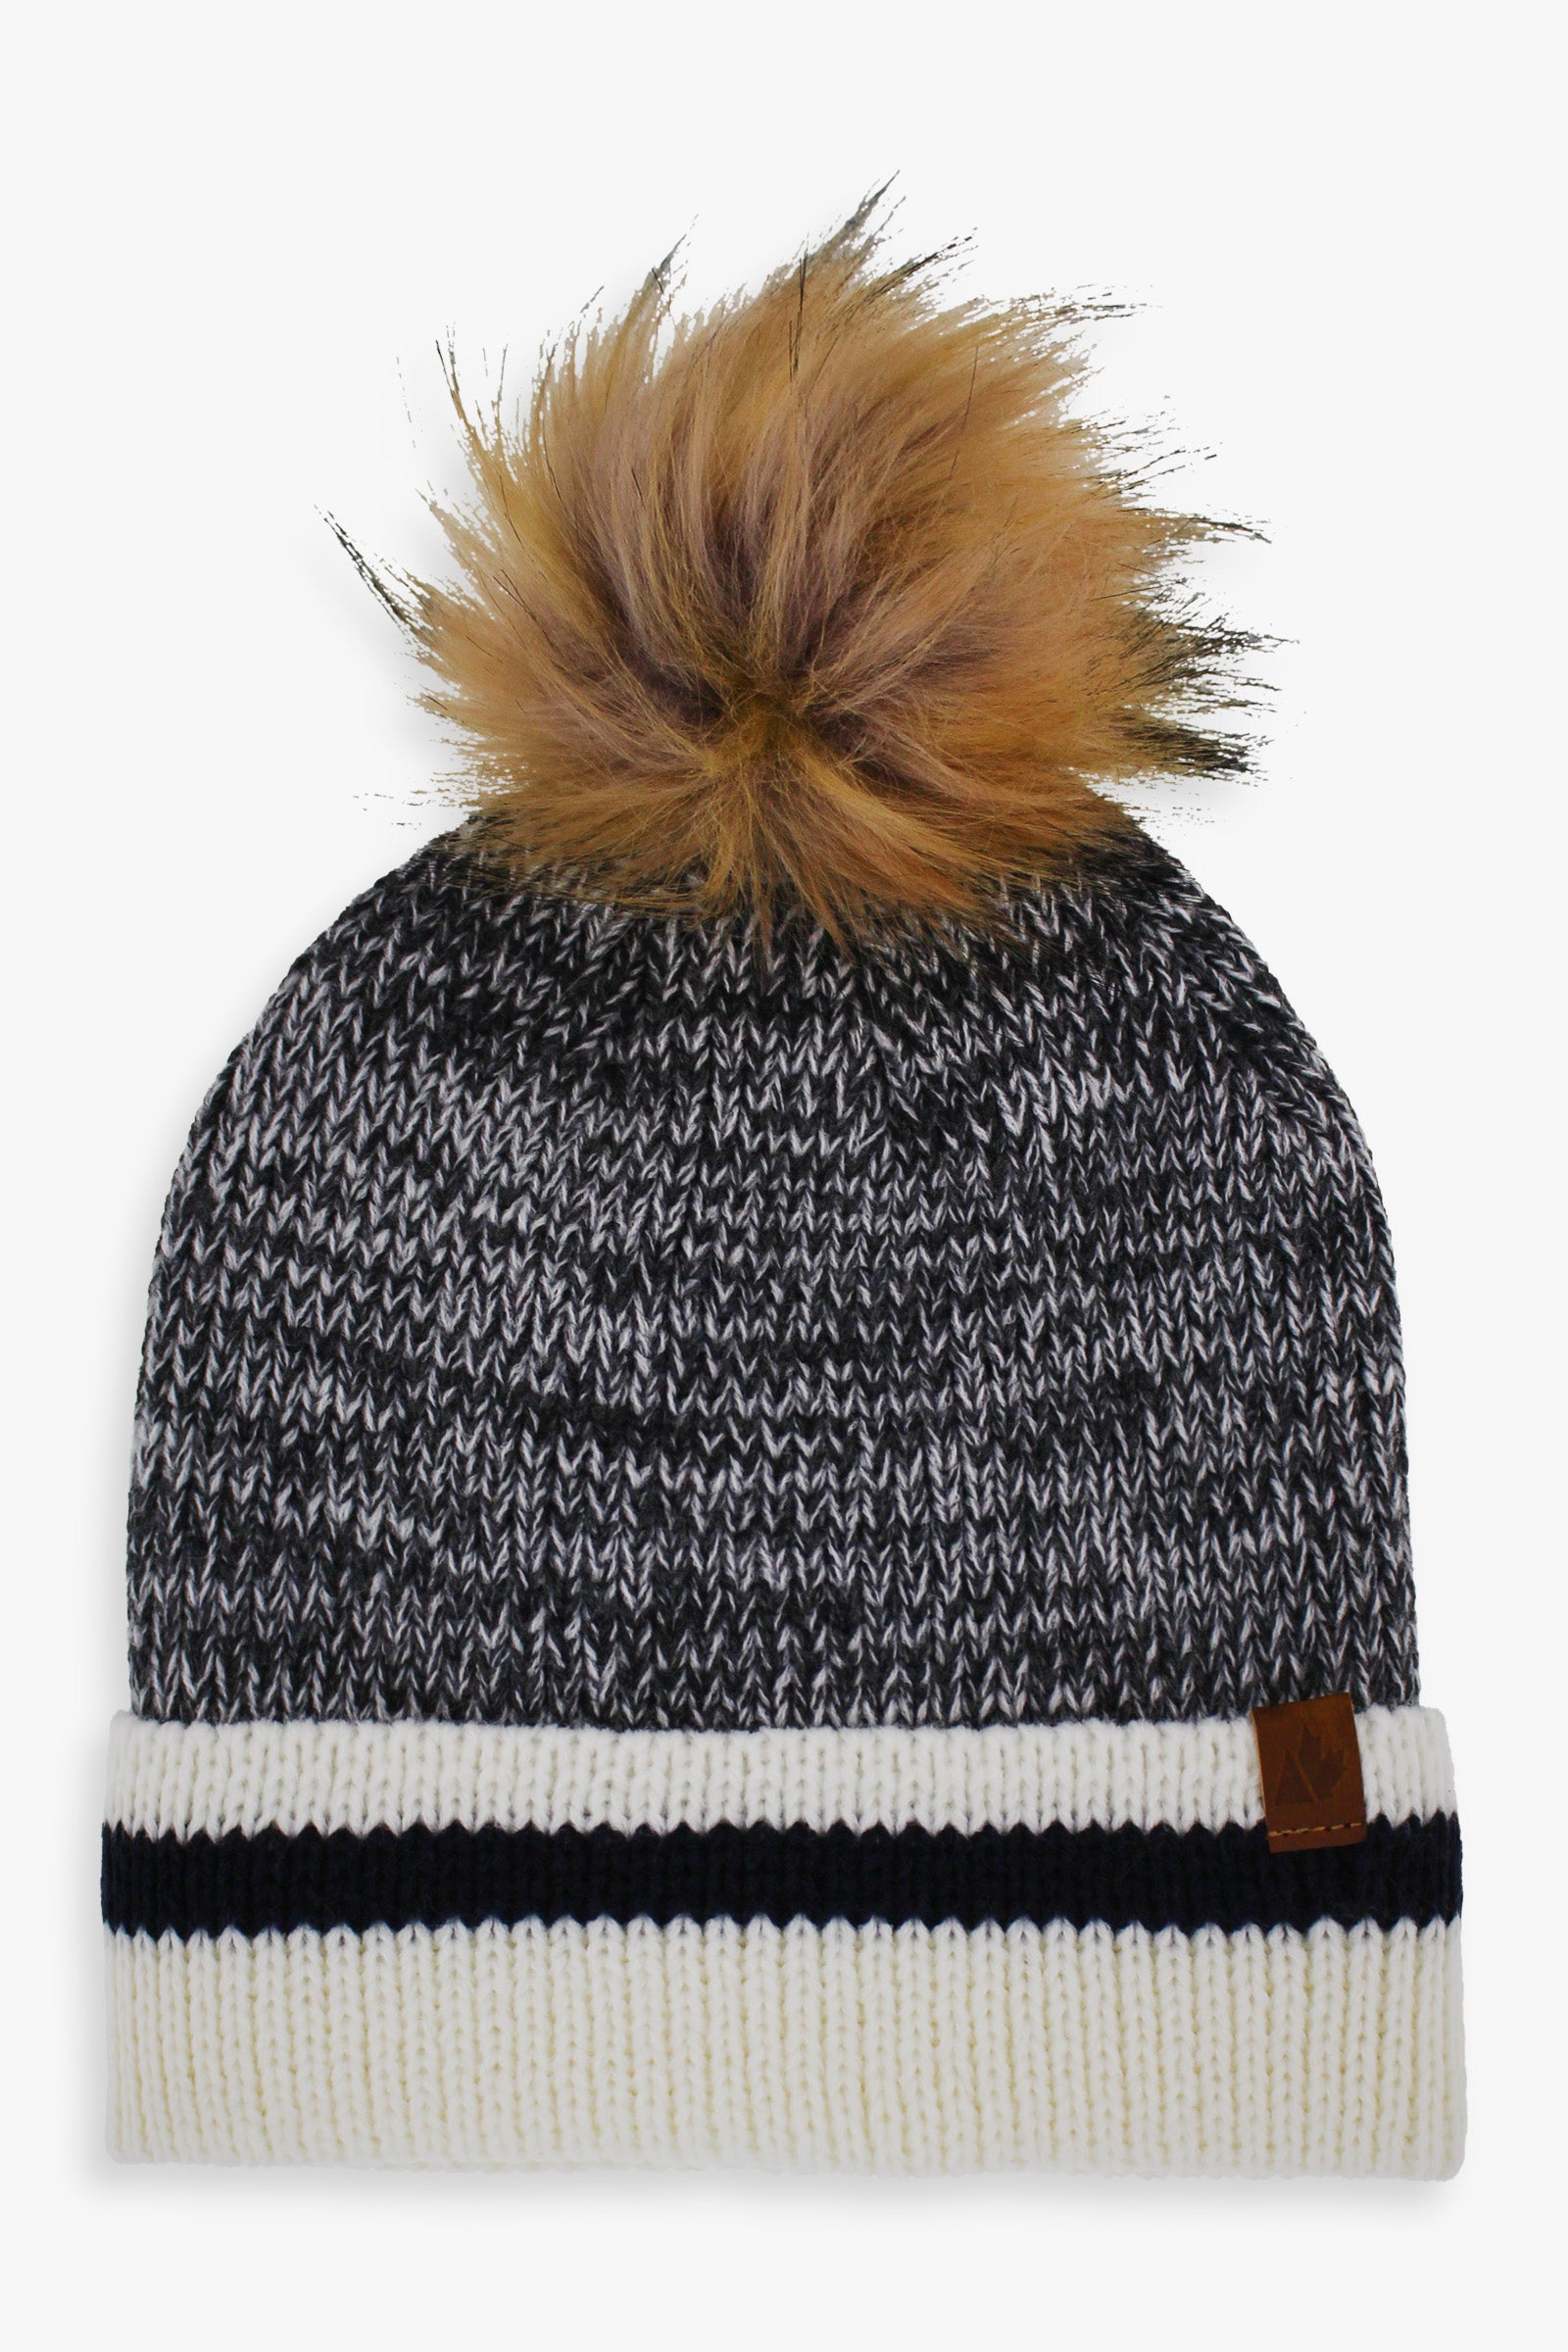 Great Northern Adult Unisex Fleece Lined Toque With Faux Fur Pom